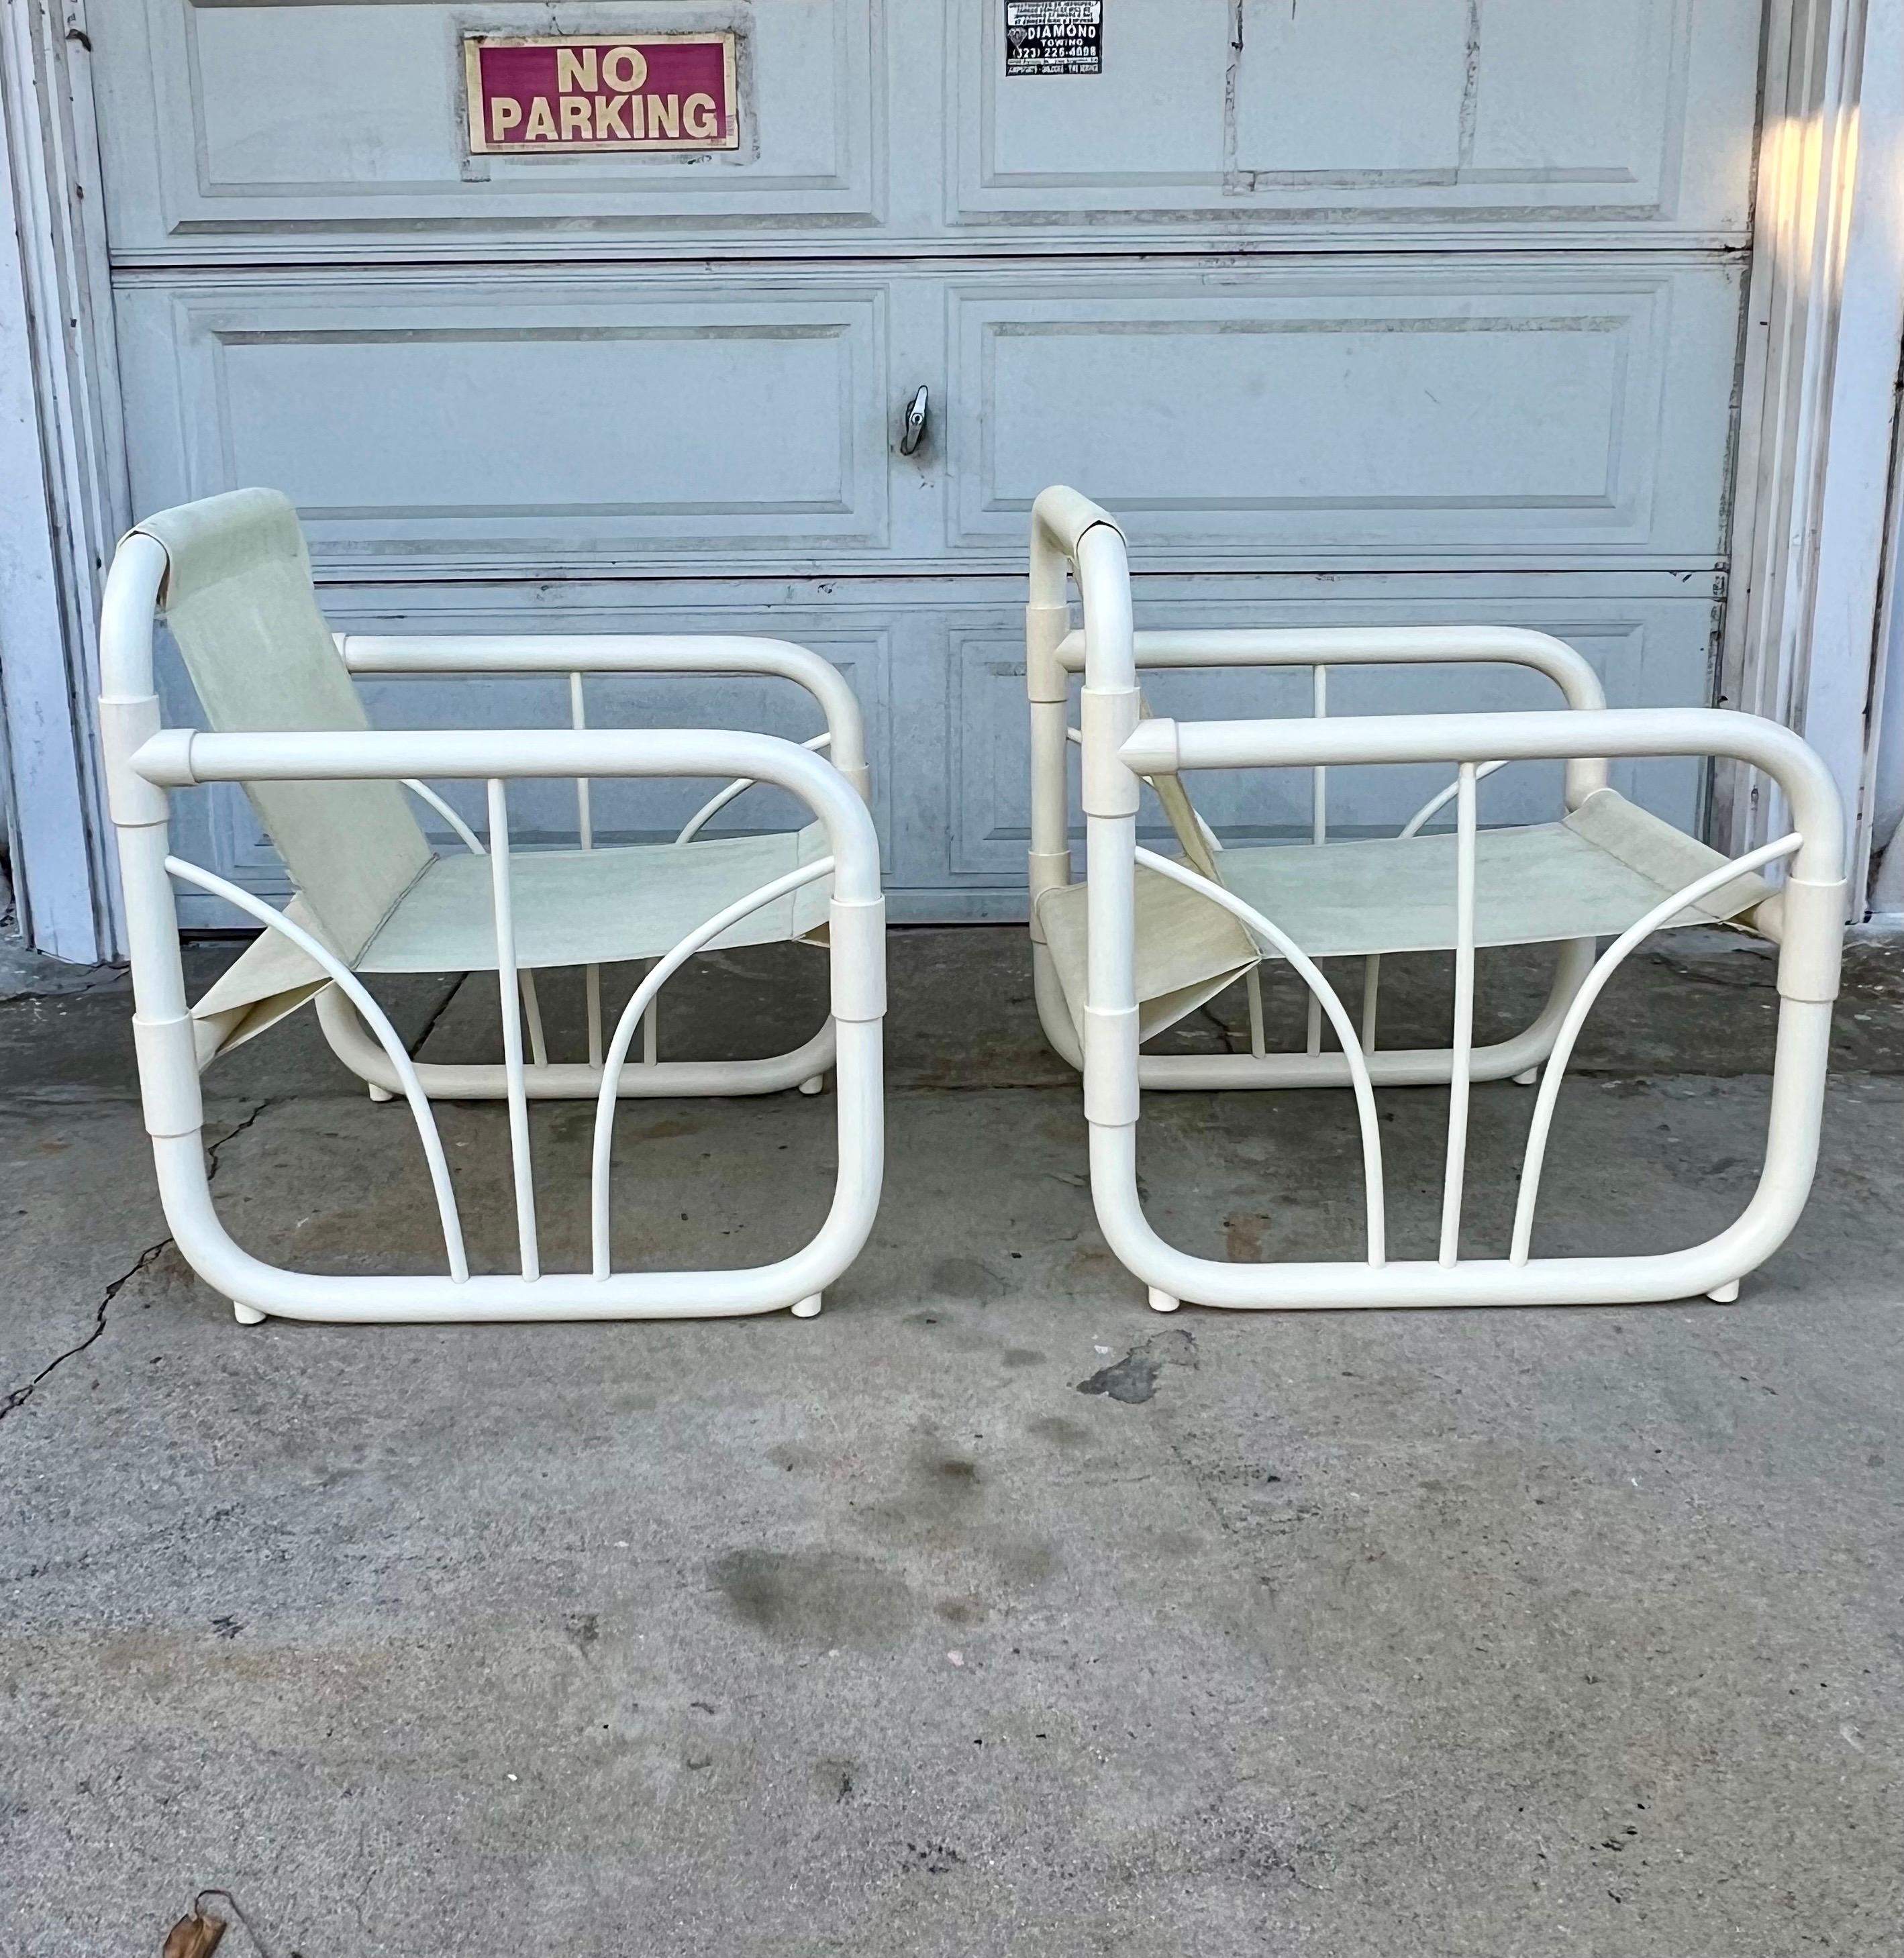 These may have been made for the outdoors, but these would 1000% work in the right living area. Club chair style with small pvc pipe accents. Overall excellent condition. Have been thoroughly cleaned. Please see closeups for minimal wear. Selling as